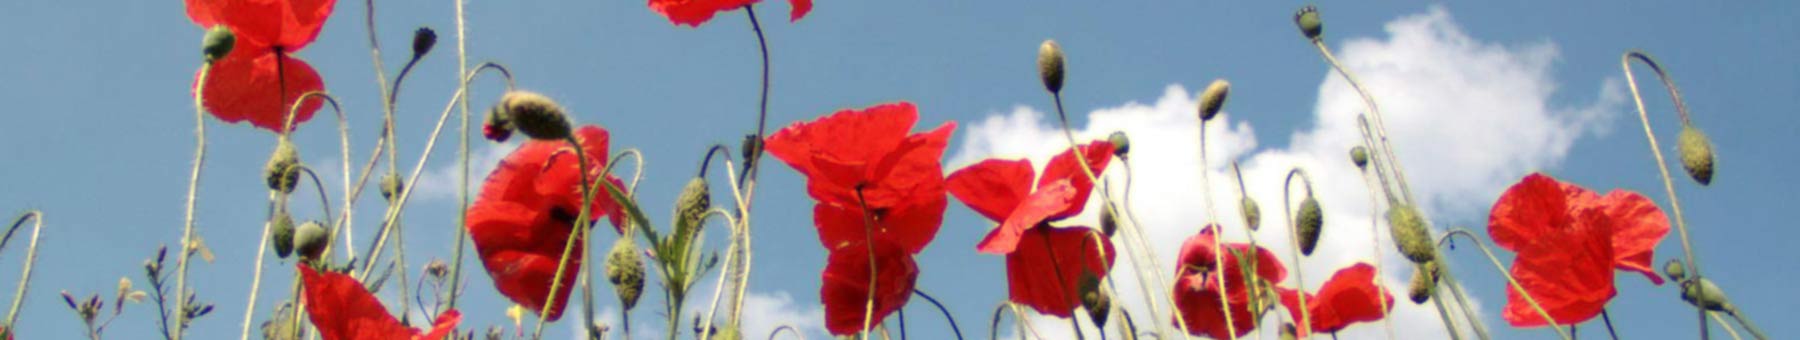 poppies against blue sky